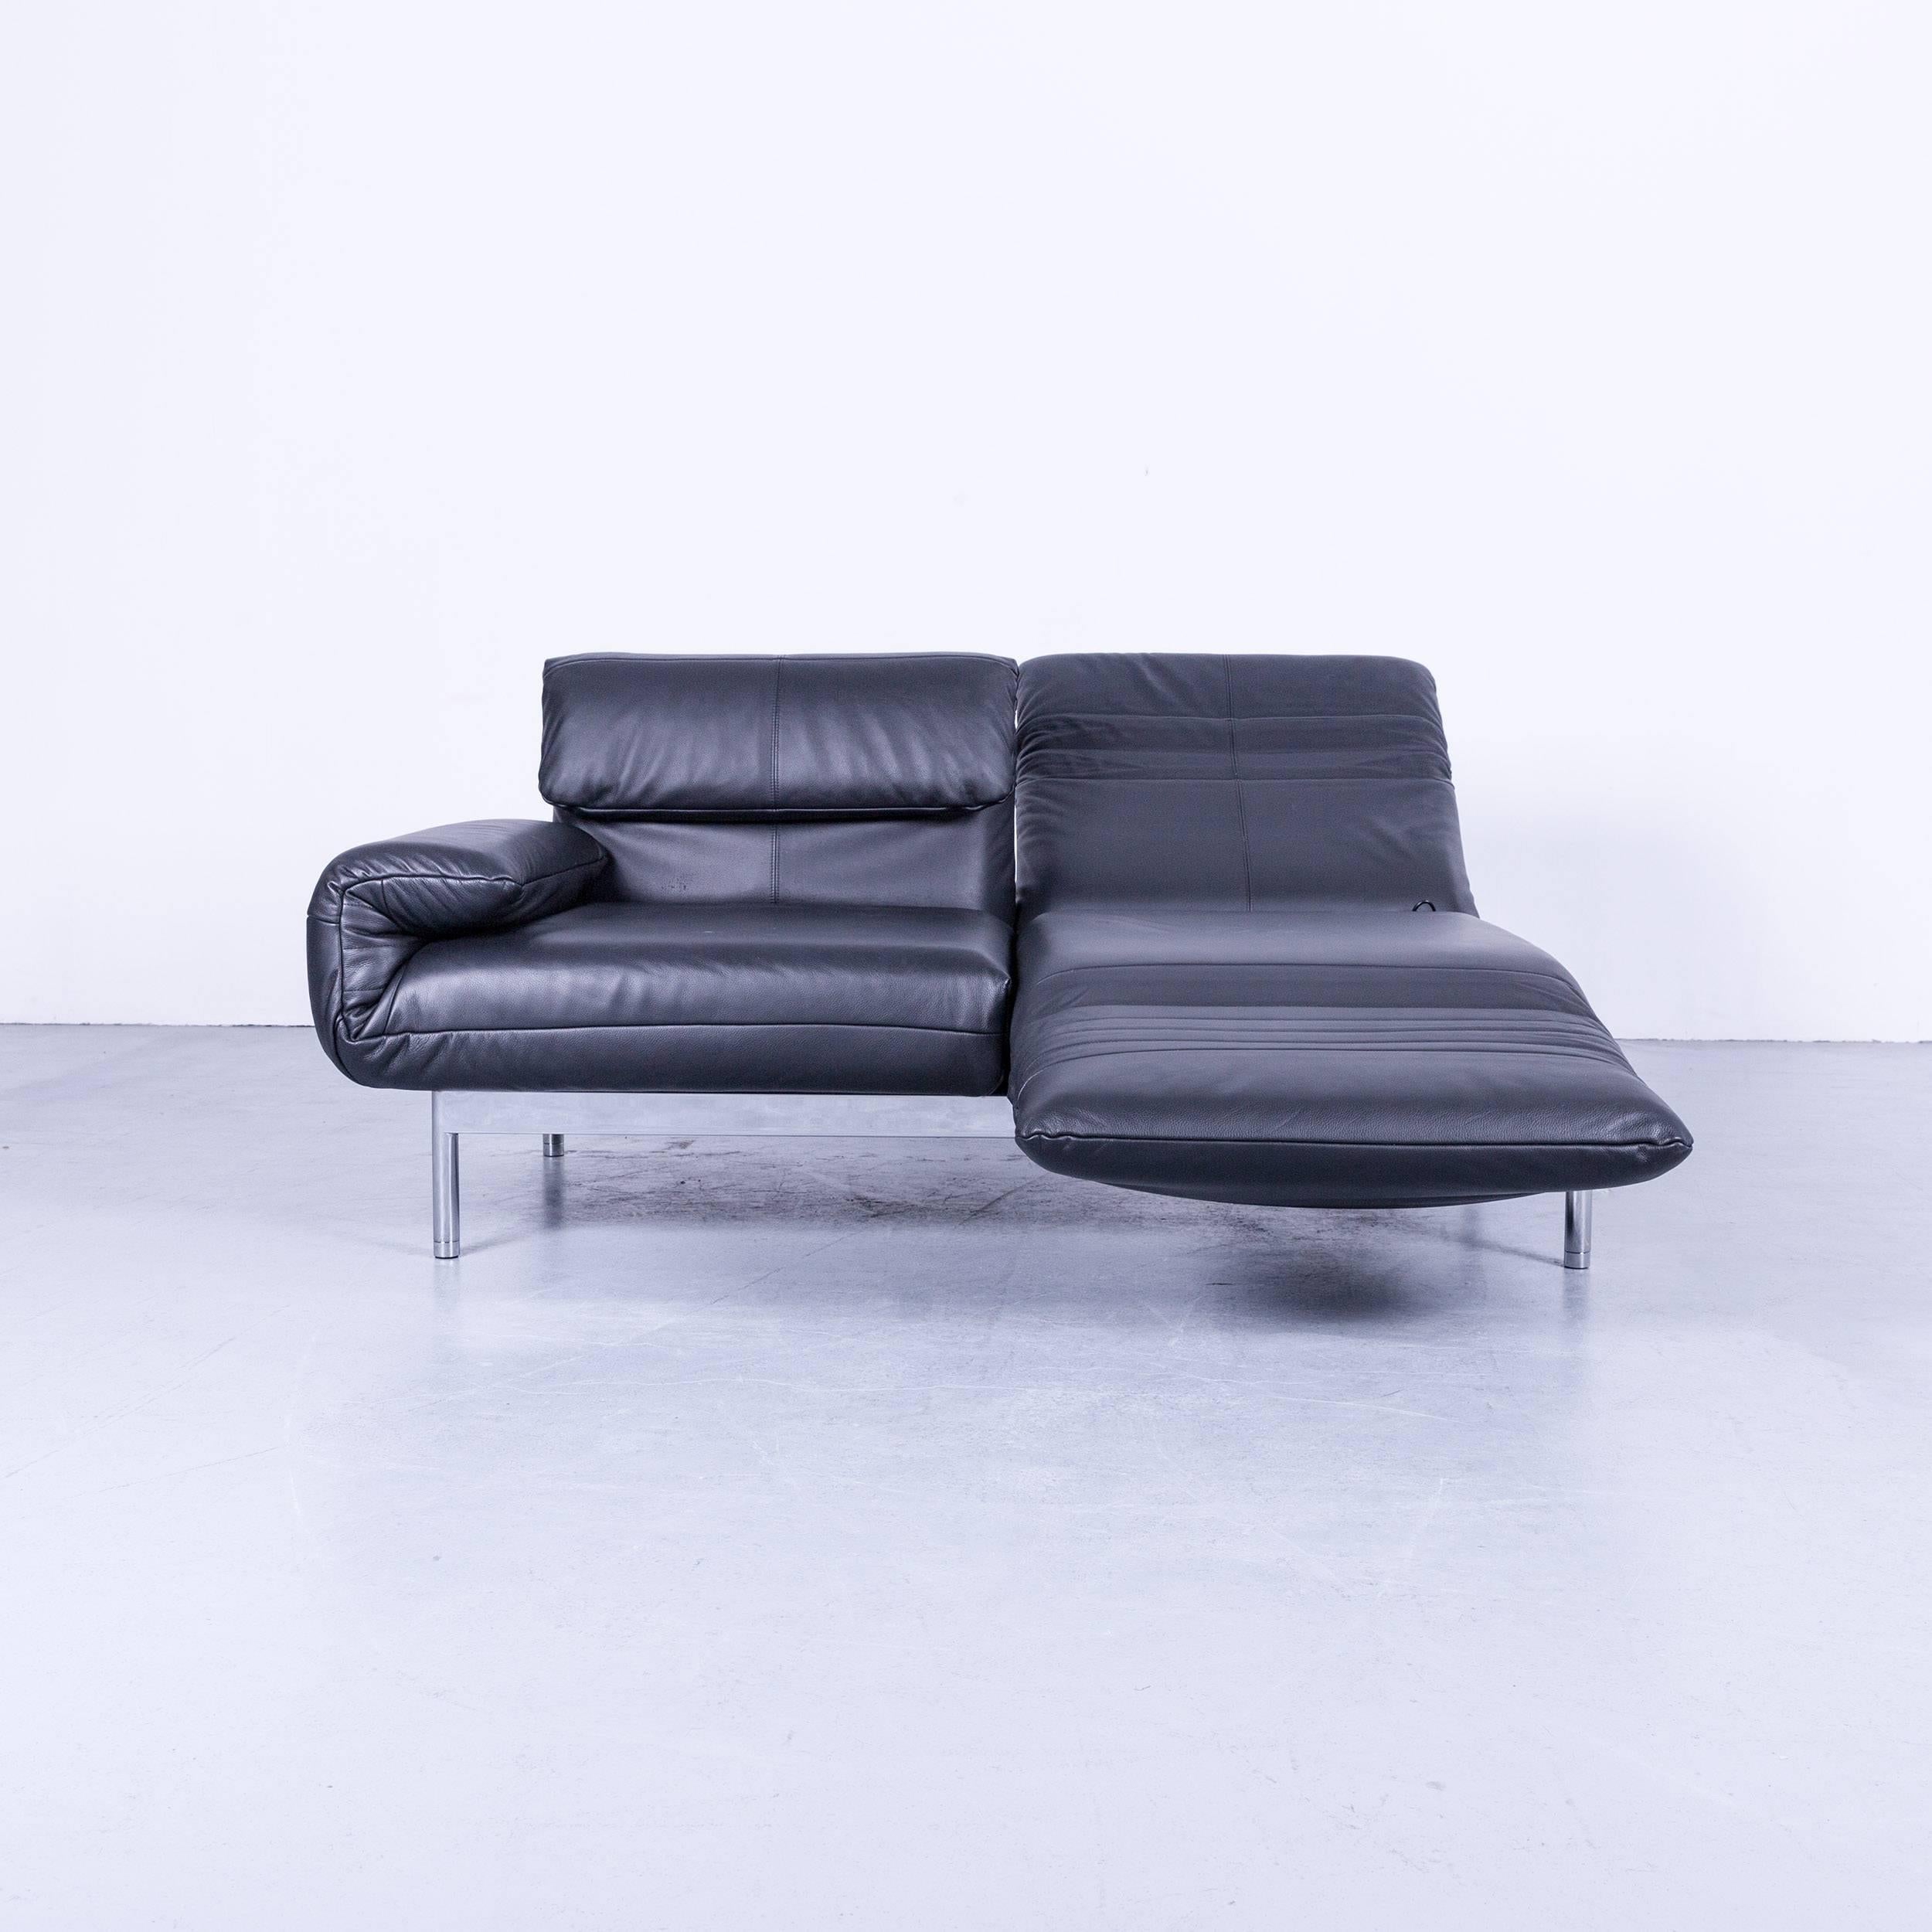 German Rolf Benz Plura Designer Sofa Leather Black Relax Function Couch Modern